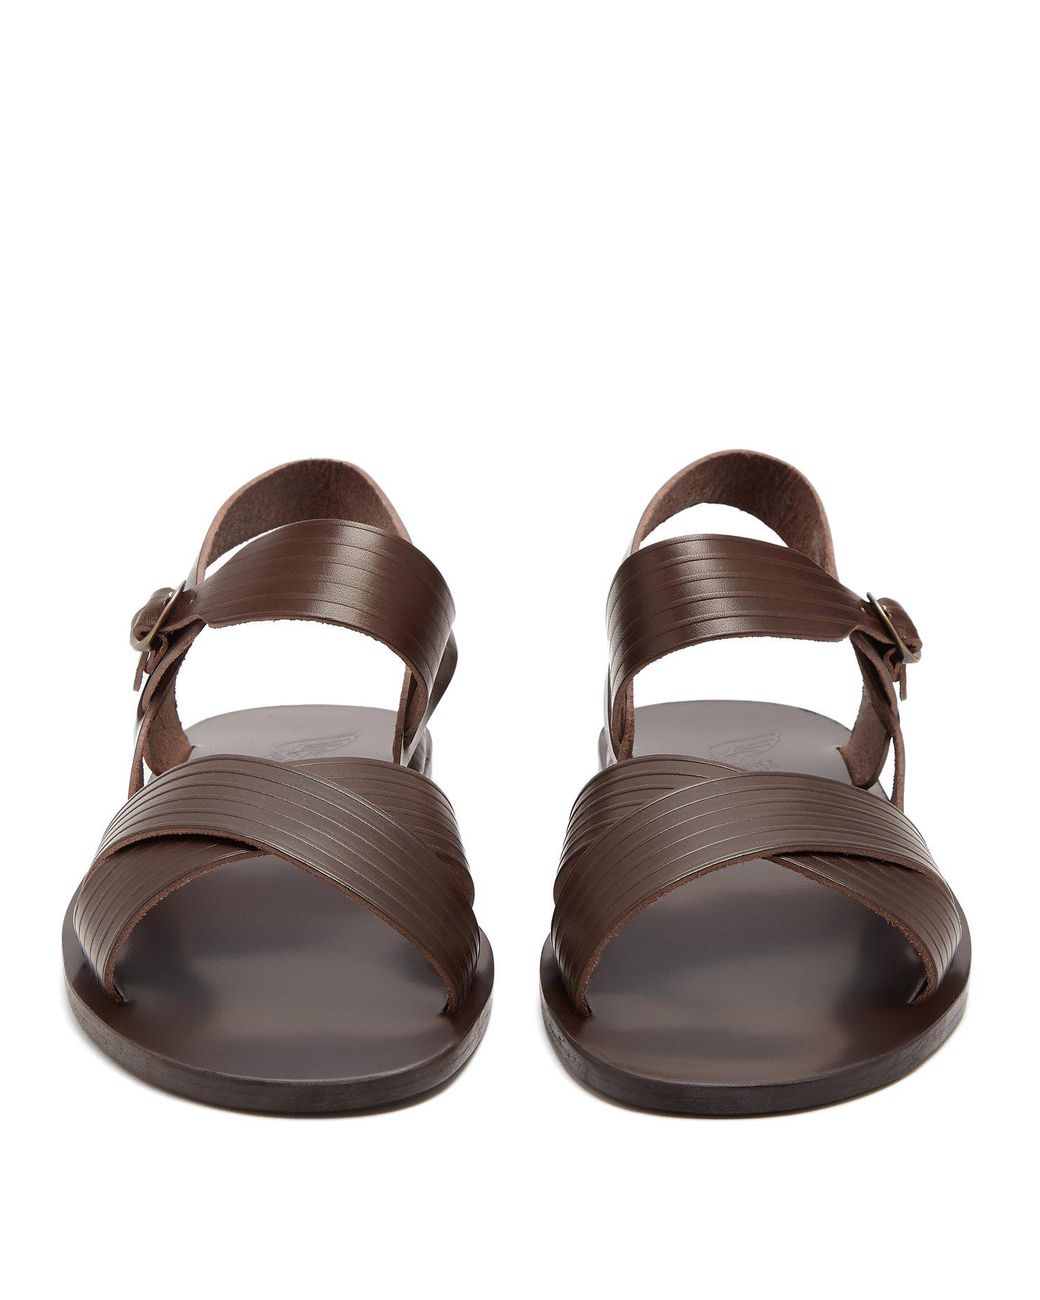 Ancient Greek Sandals Socrates Leather Sandals in Brown for Men | Lyst